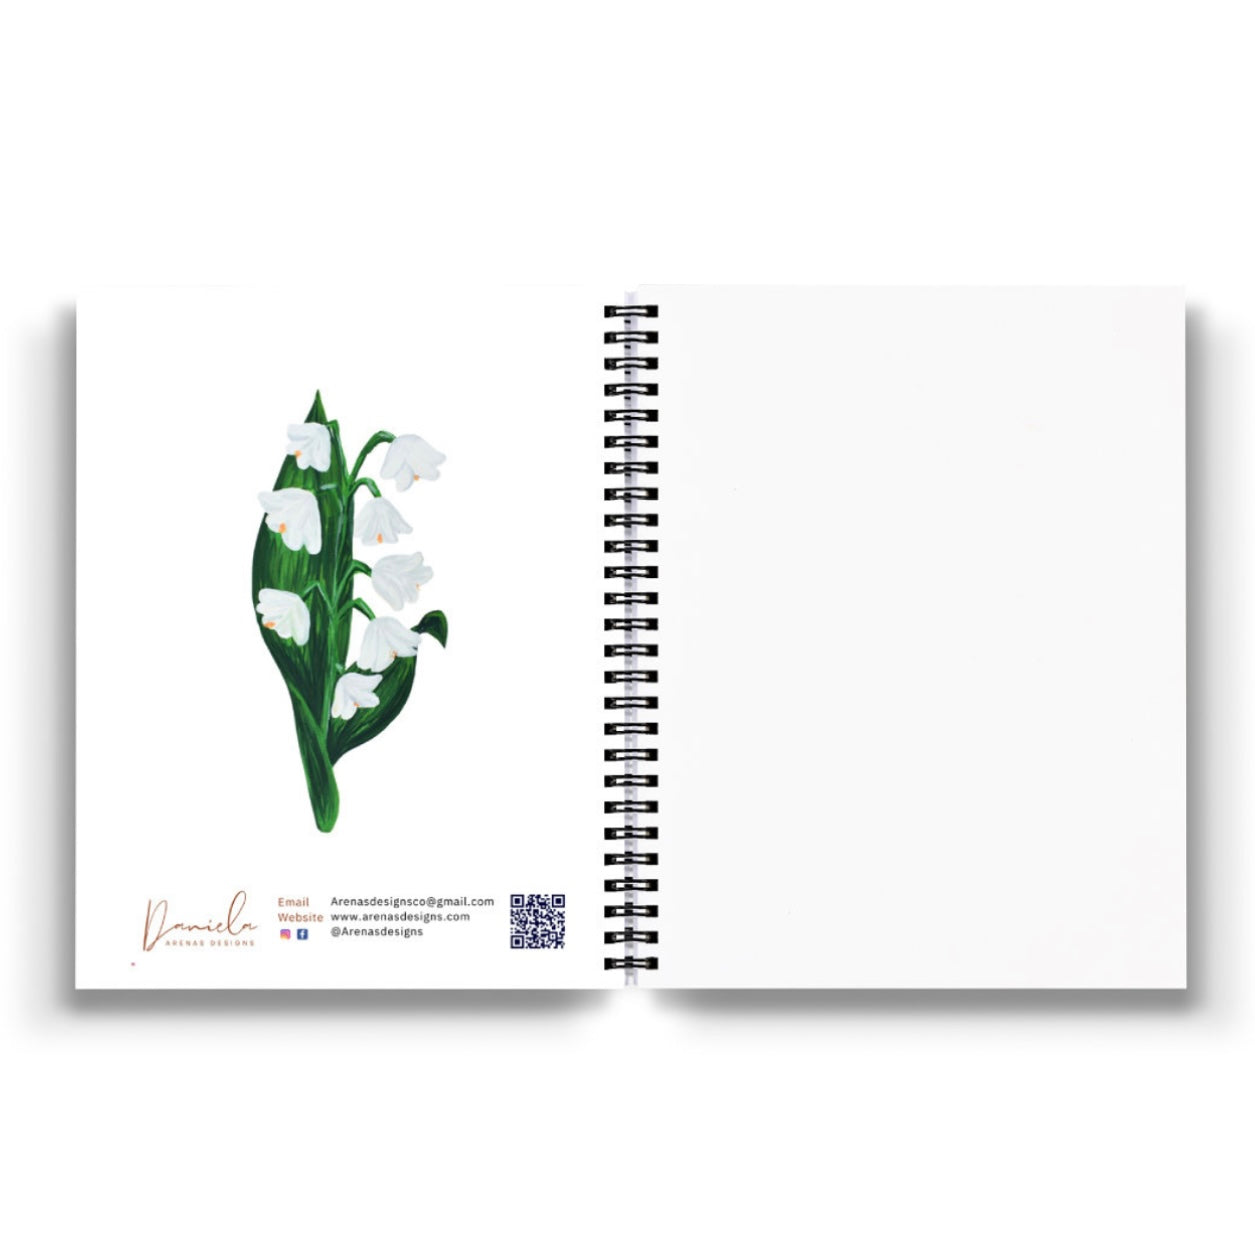 Lily of the valley Spiral Lined Notebook